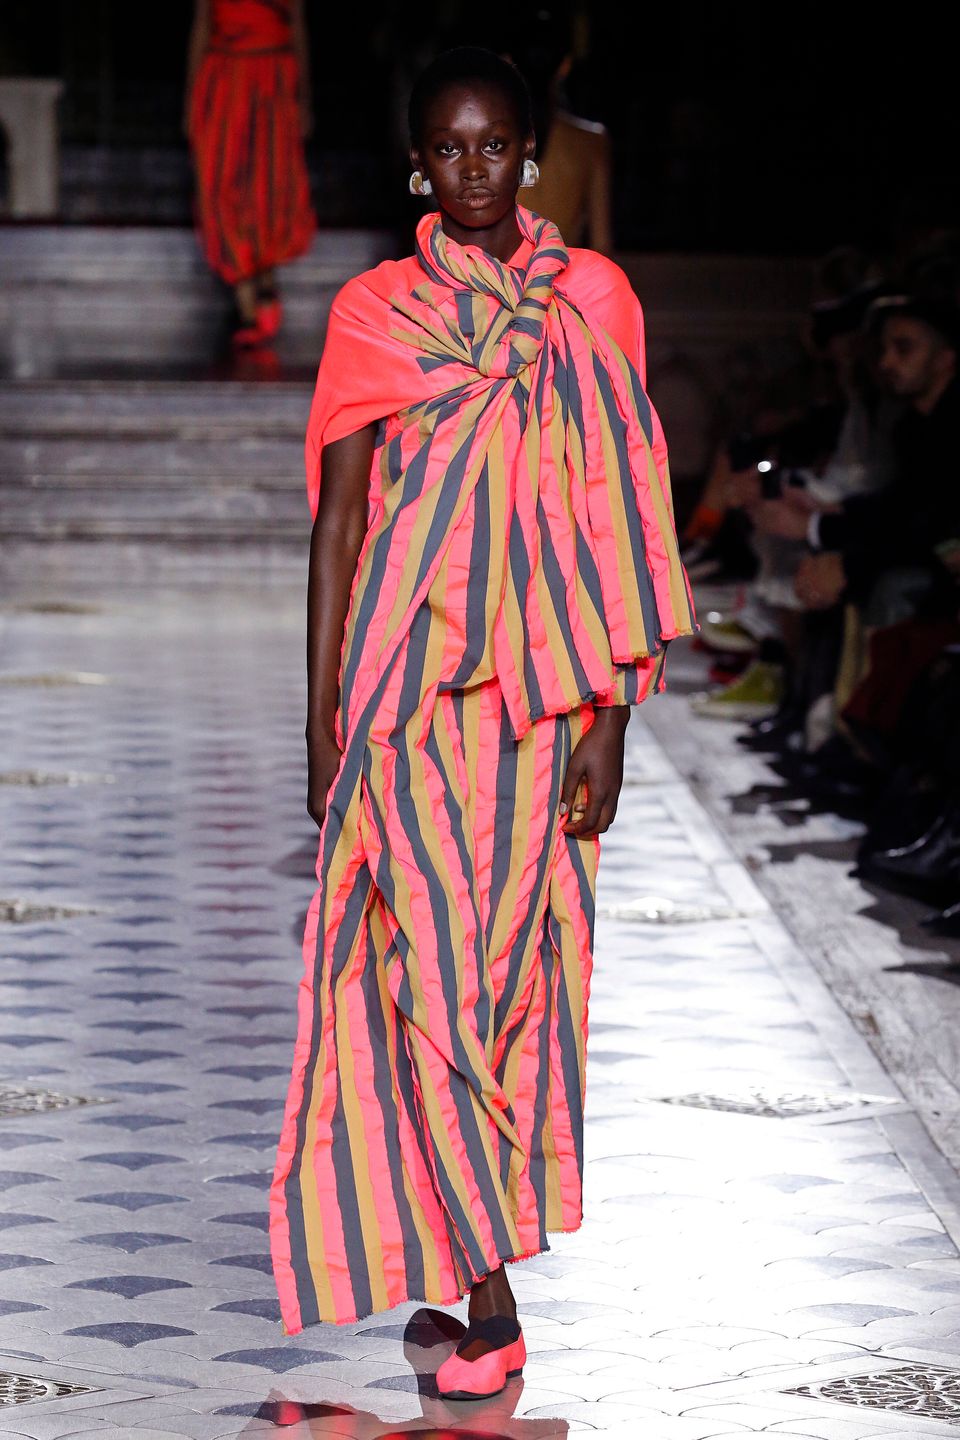 35 Of The Most Beautiful Dresses At Paris Fashion Week | HuffPost Life